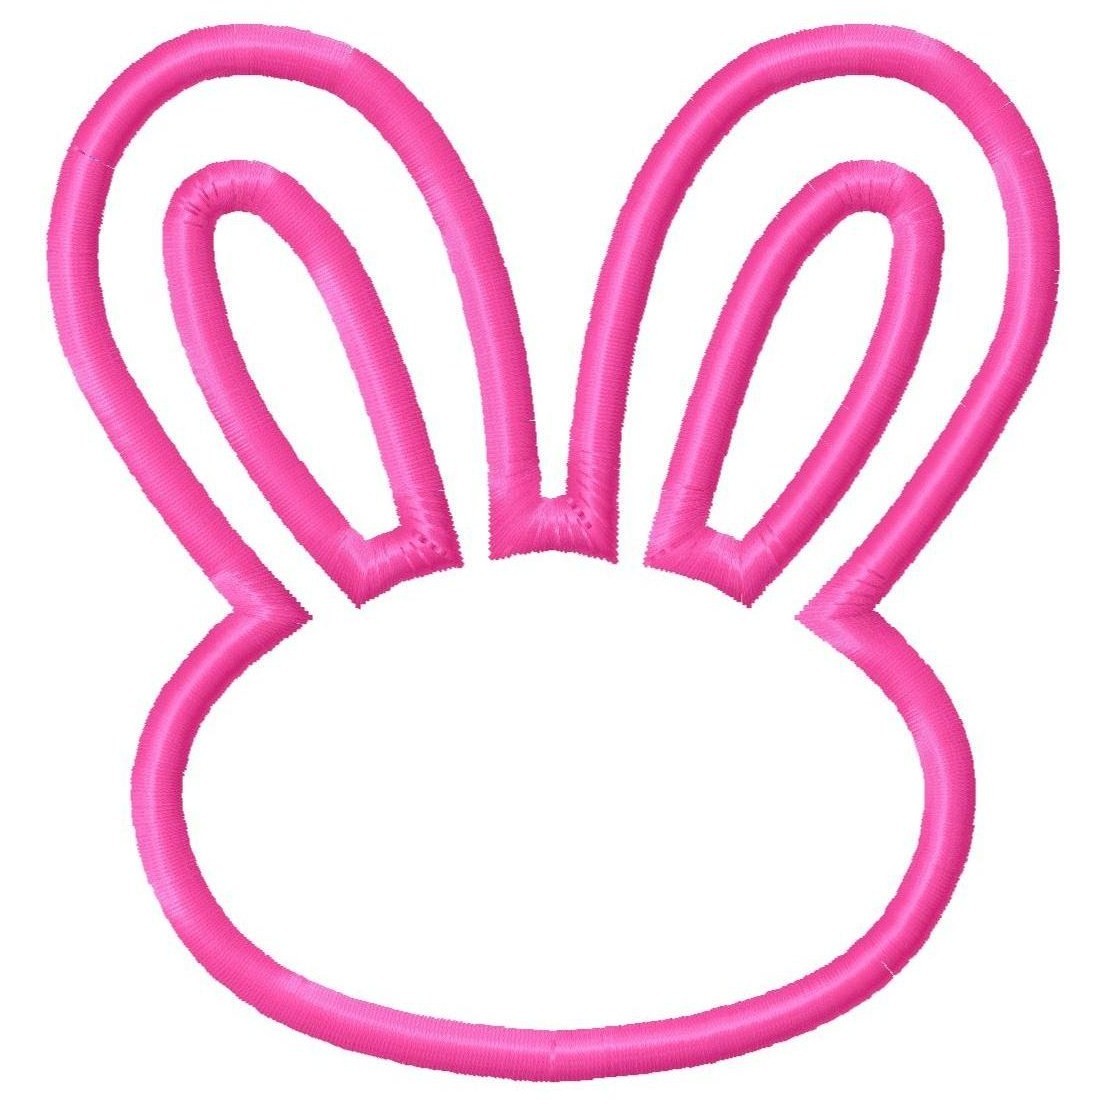 Popular items for bunny outline on Etsy